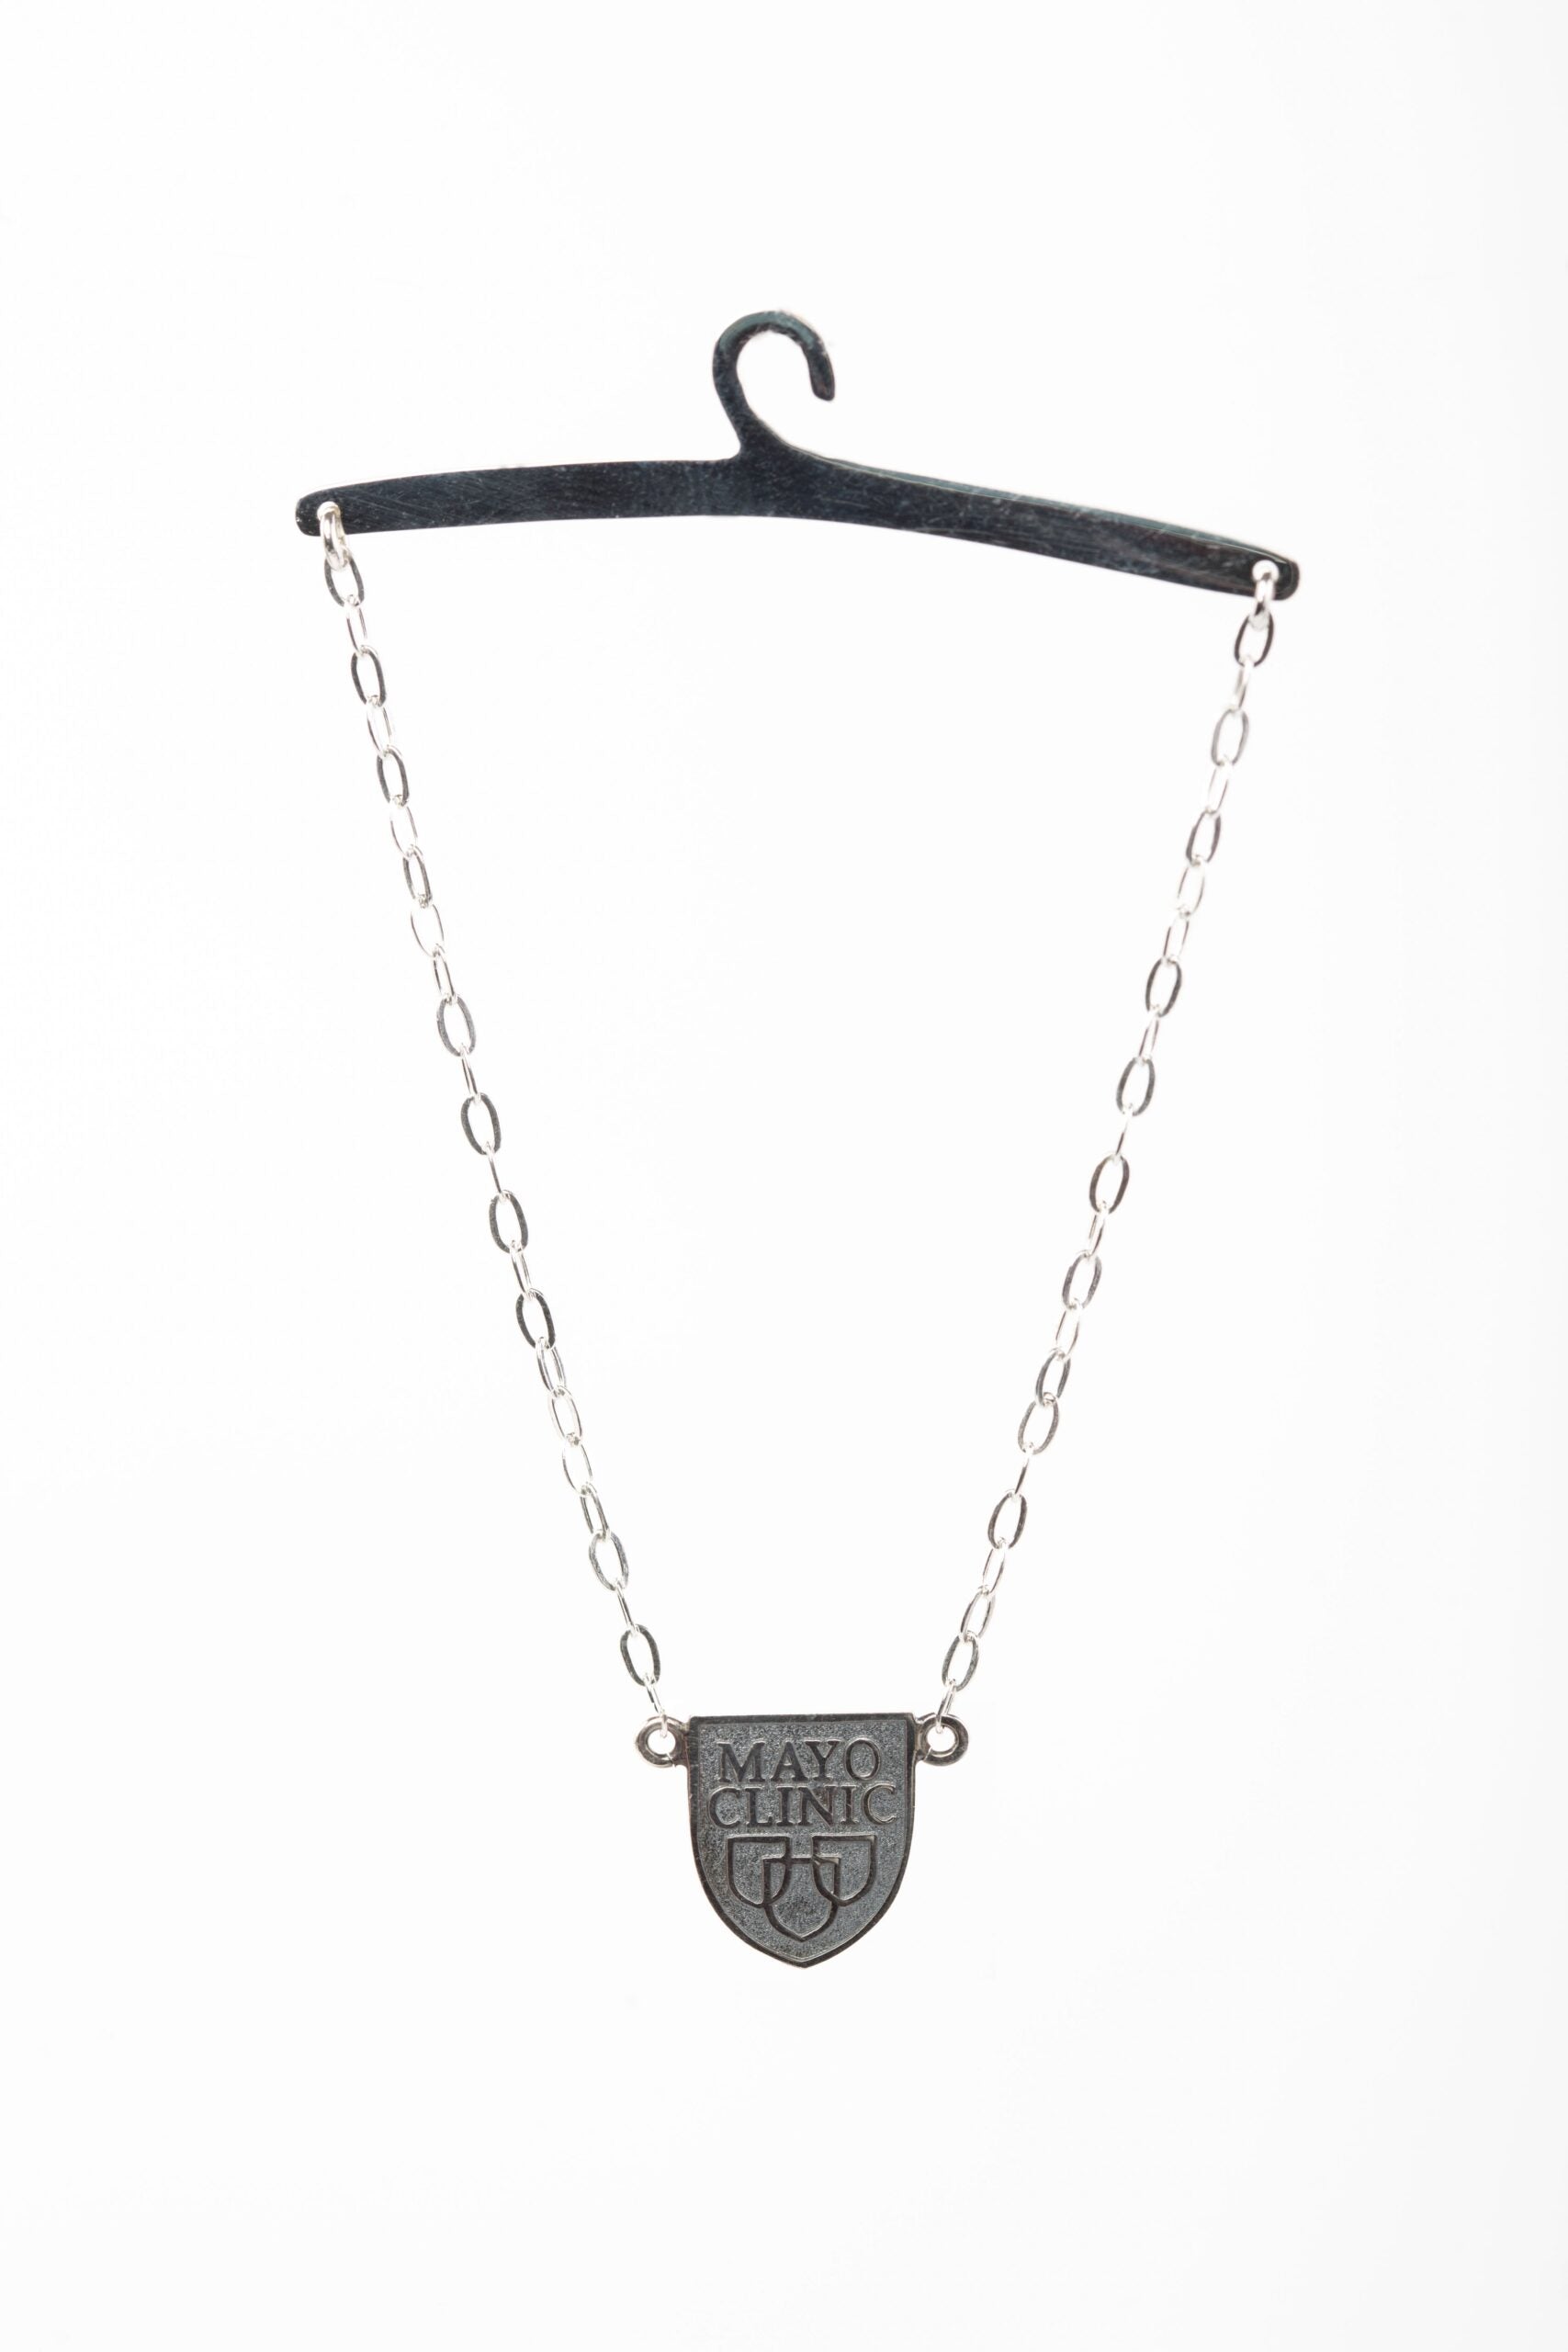 Delapina Tie Chain_revised_3751098_0004R